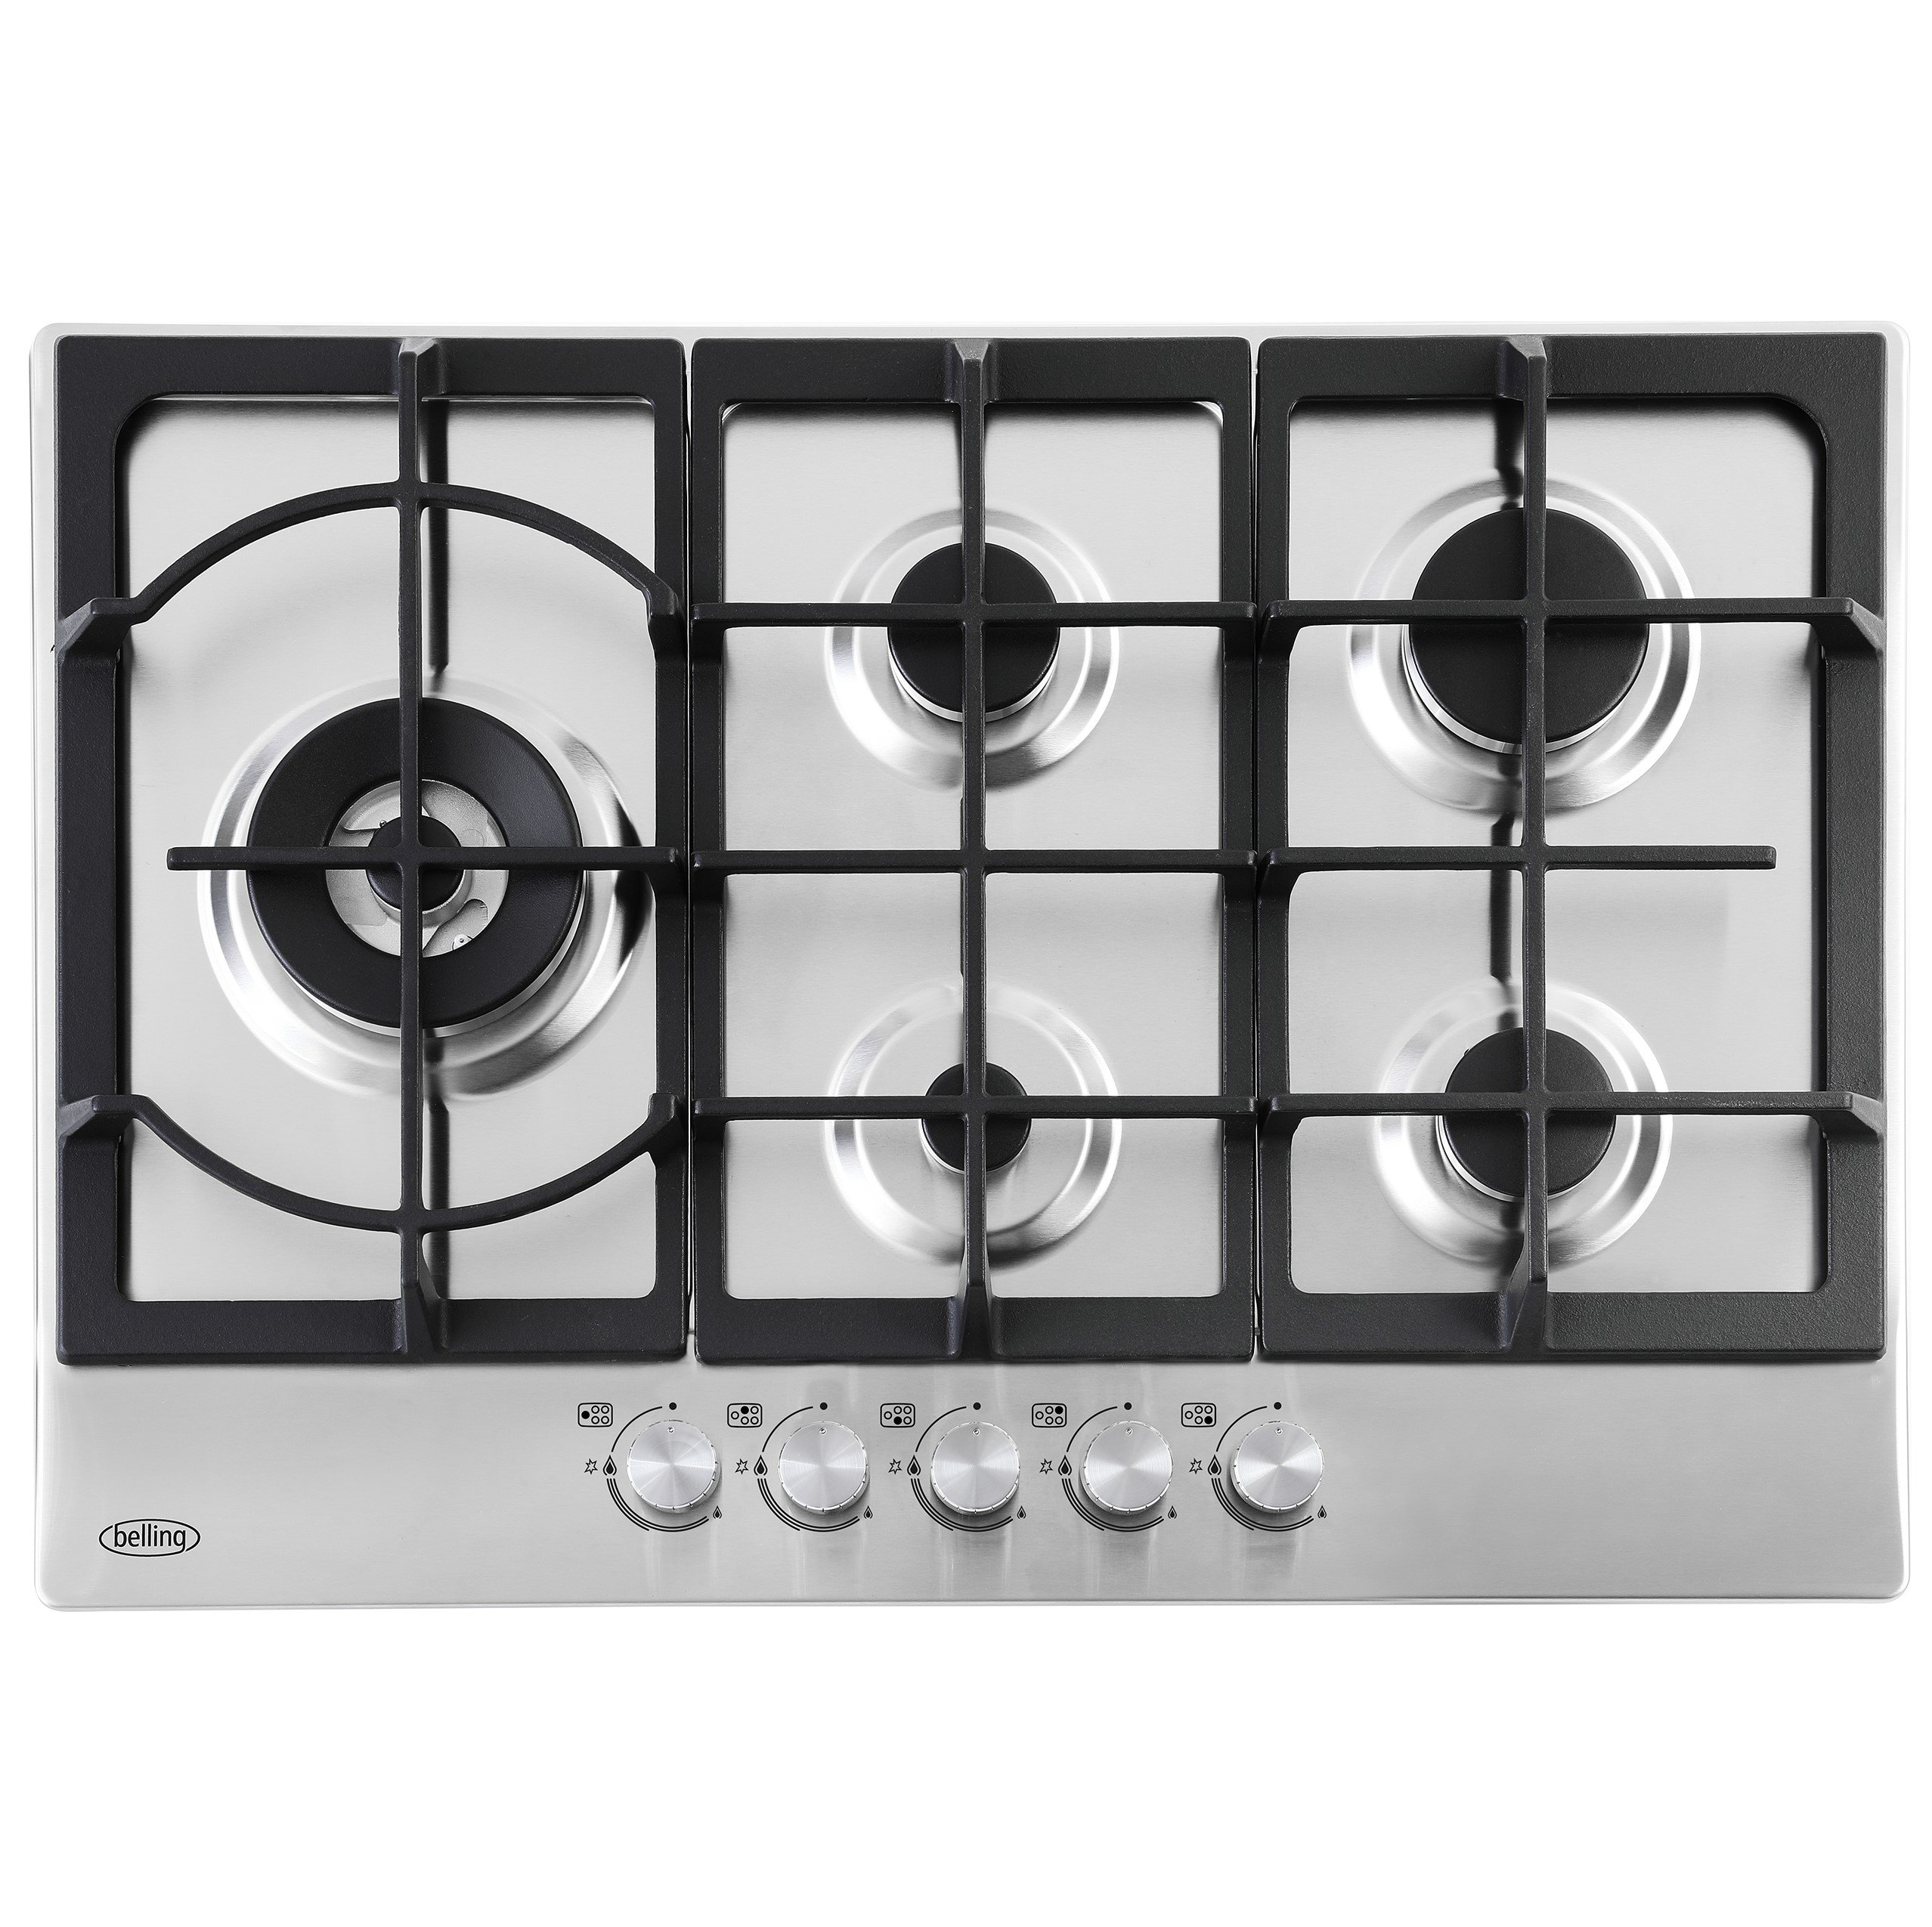 75cm stainless steel gas hob with powerful 3.6kW wok burner and cast iron pan supports